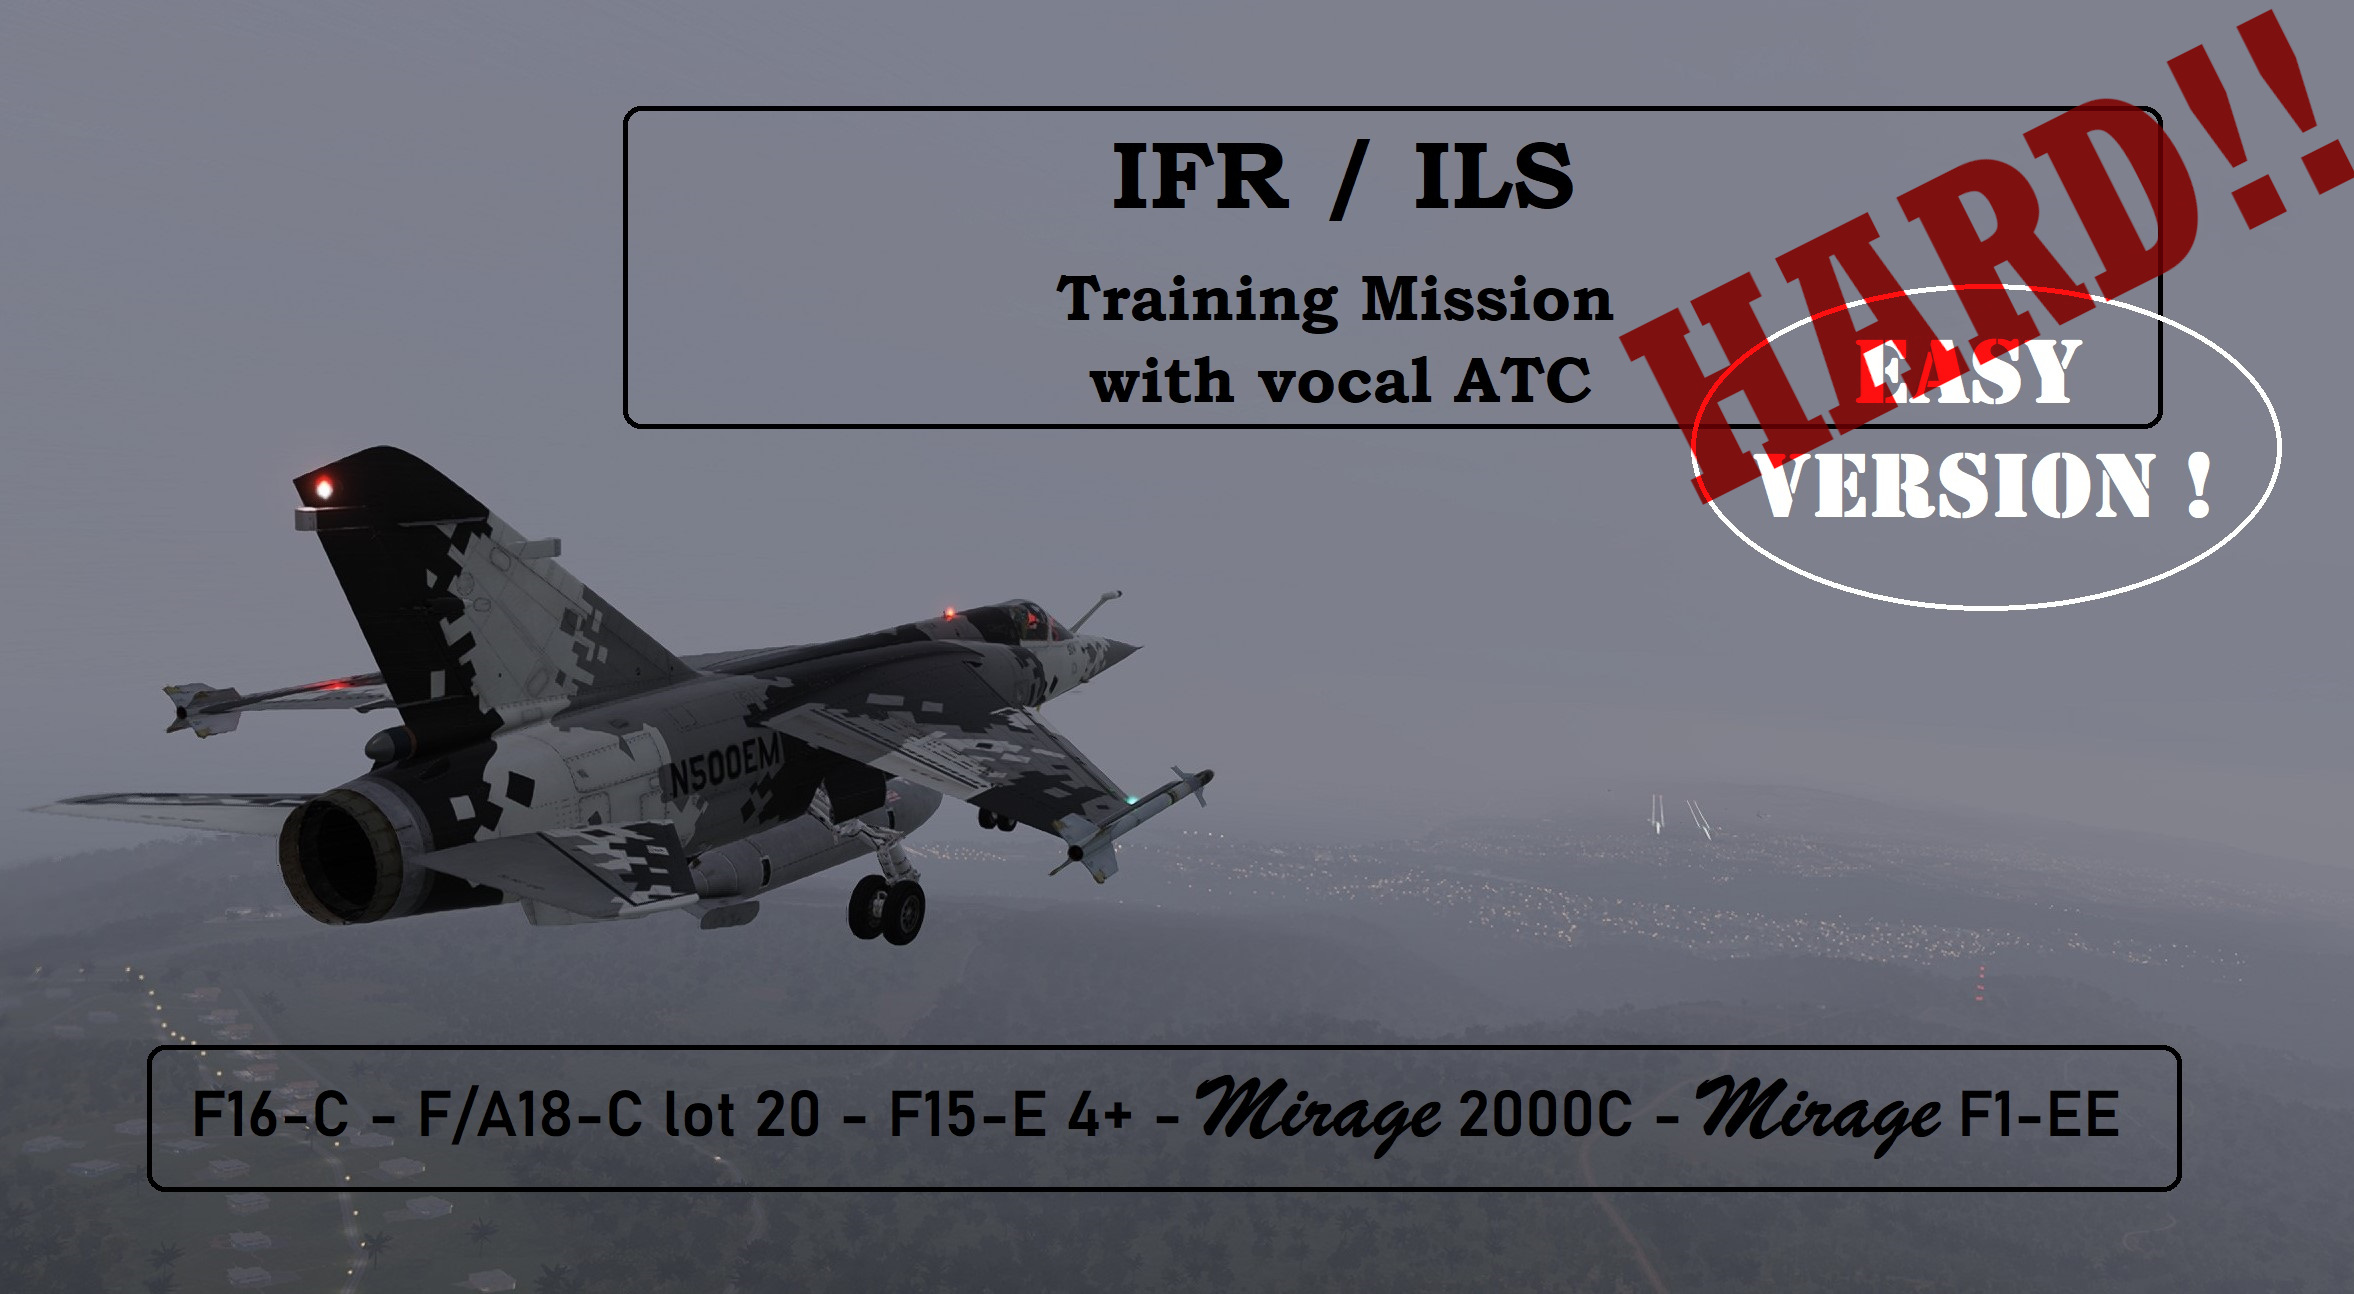 IFR ILS Training Mission over Marianas  SOLO-MULTI HARD VERSION- FOG - NIGHT [F16-C - F15-E - F/A-18C - M2KC - F1-EE]